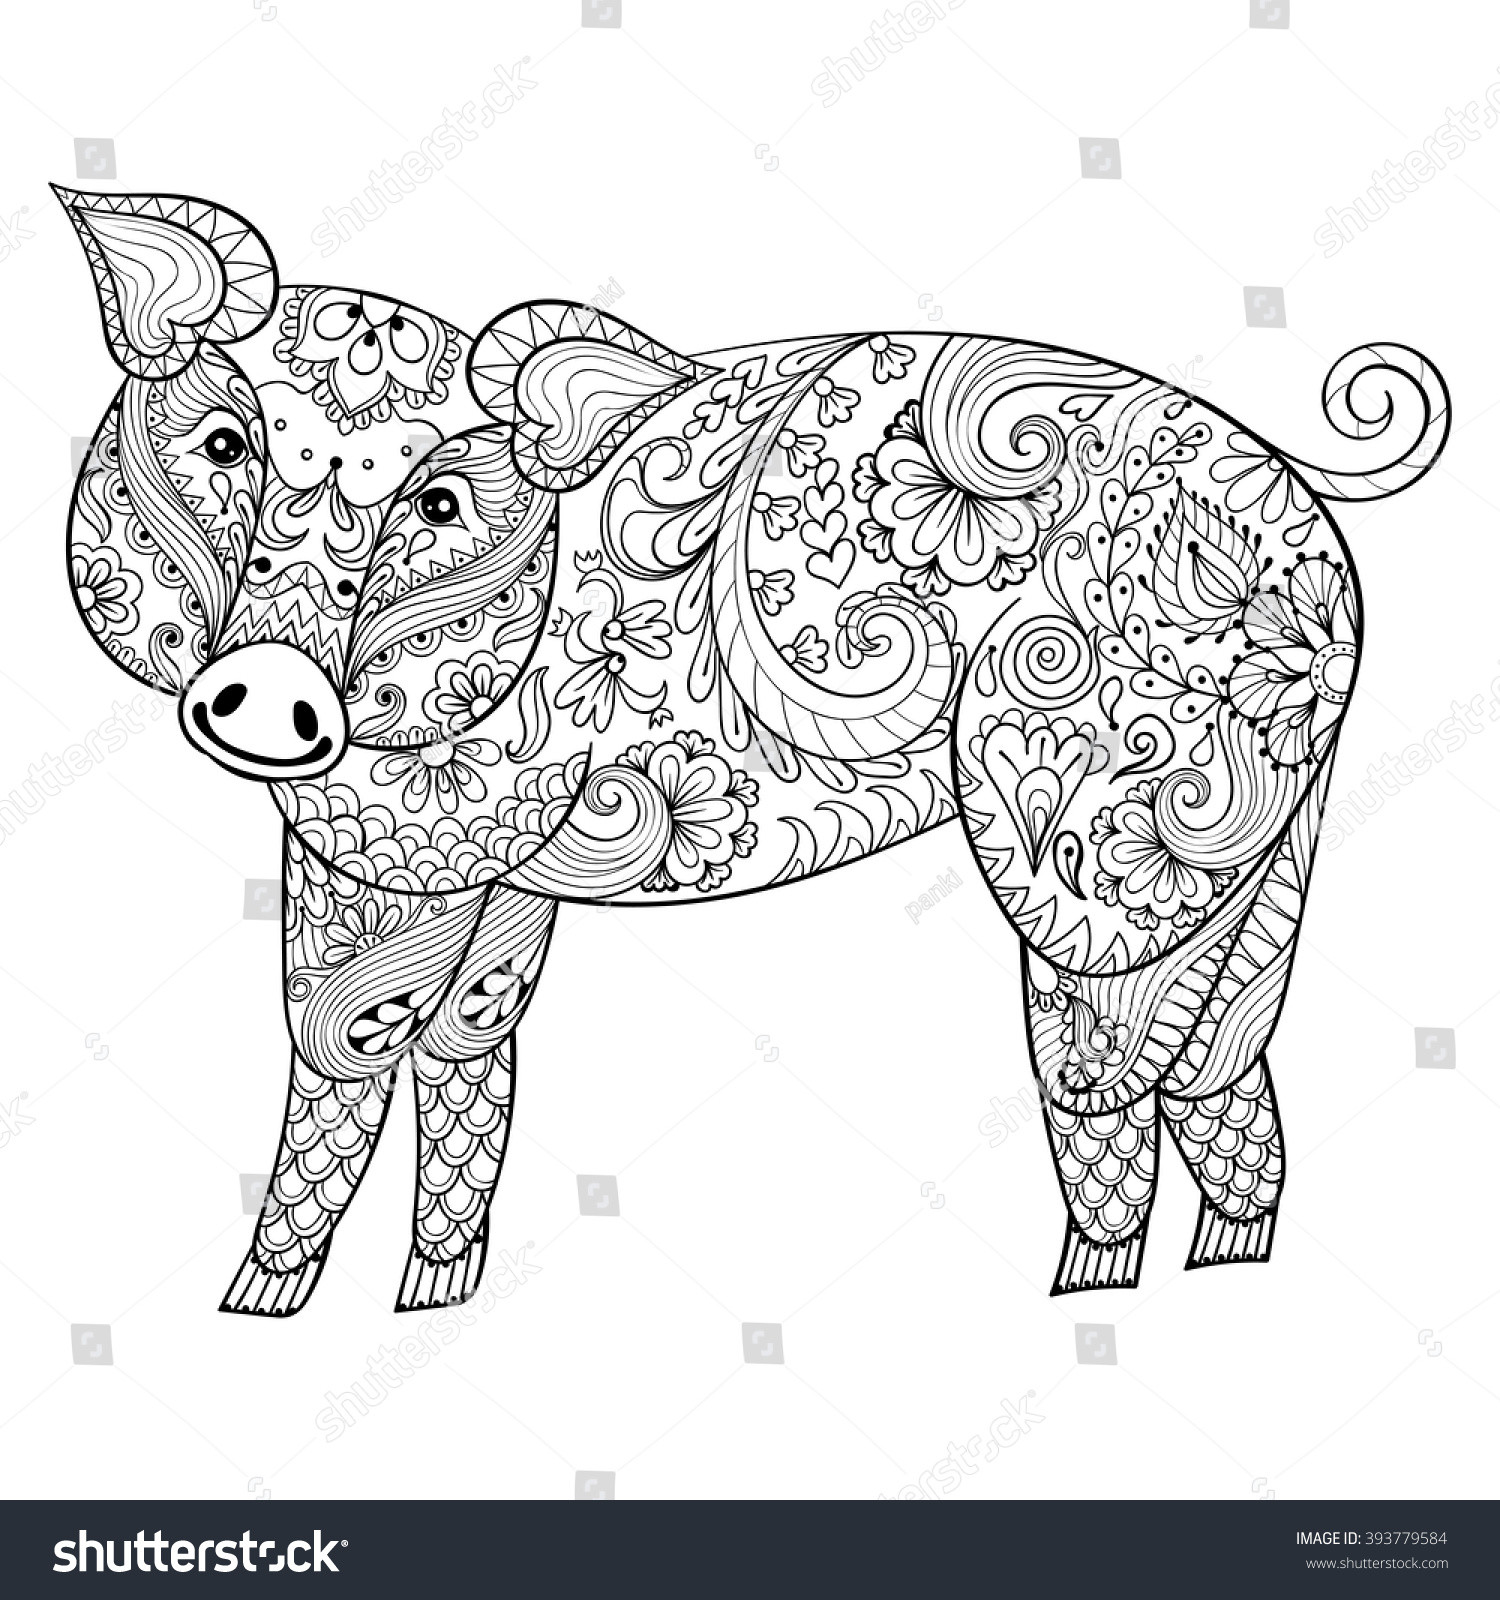 Pig Coloring Pages For Adults
 Vector Pig Zentangle Pig Illustration Swine Stock Vector